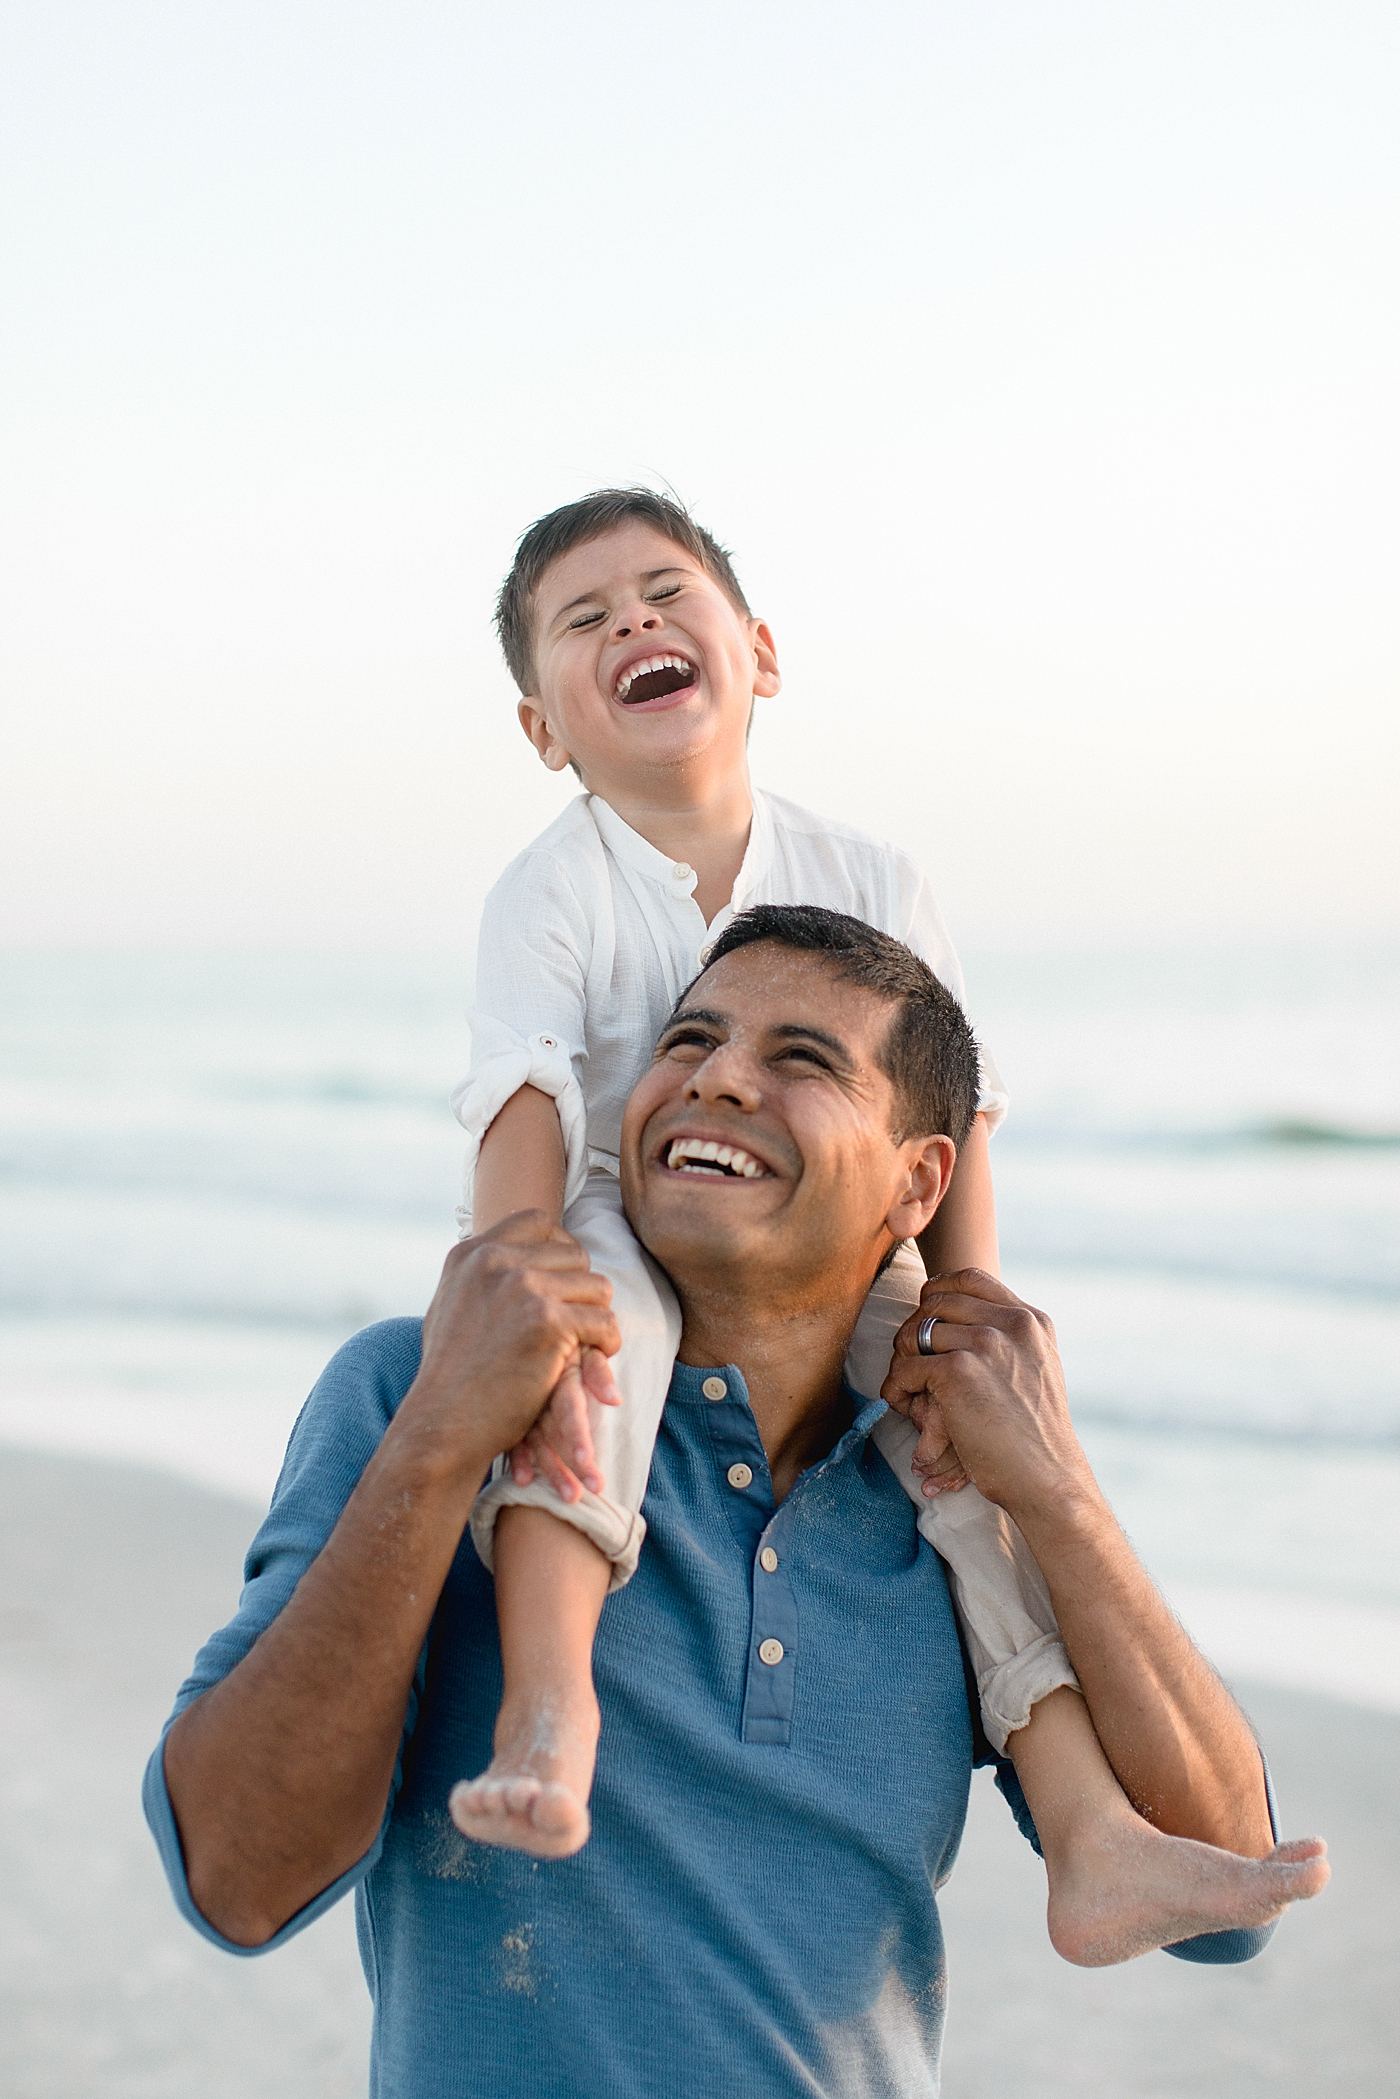 Father and son laughing together. Photos by Brittany Elise Photography.